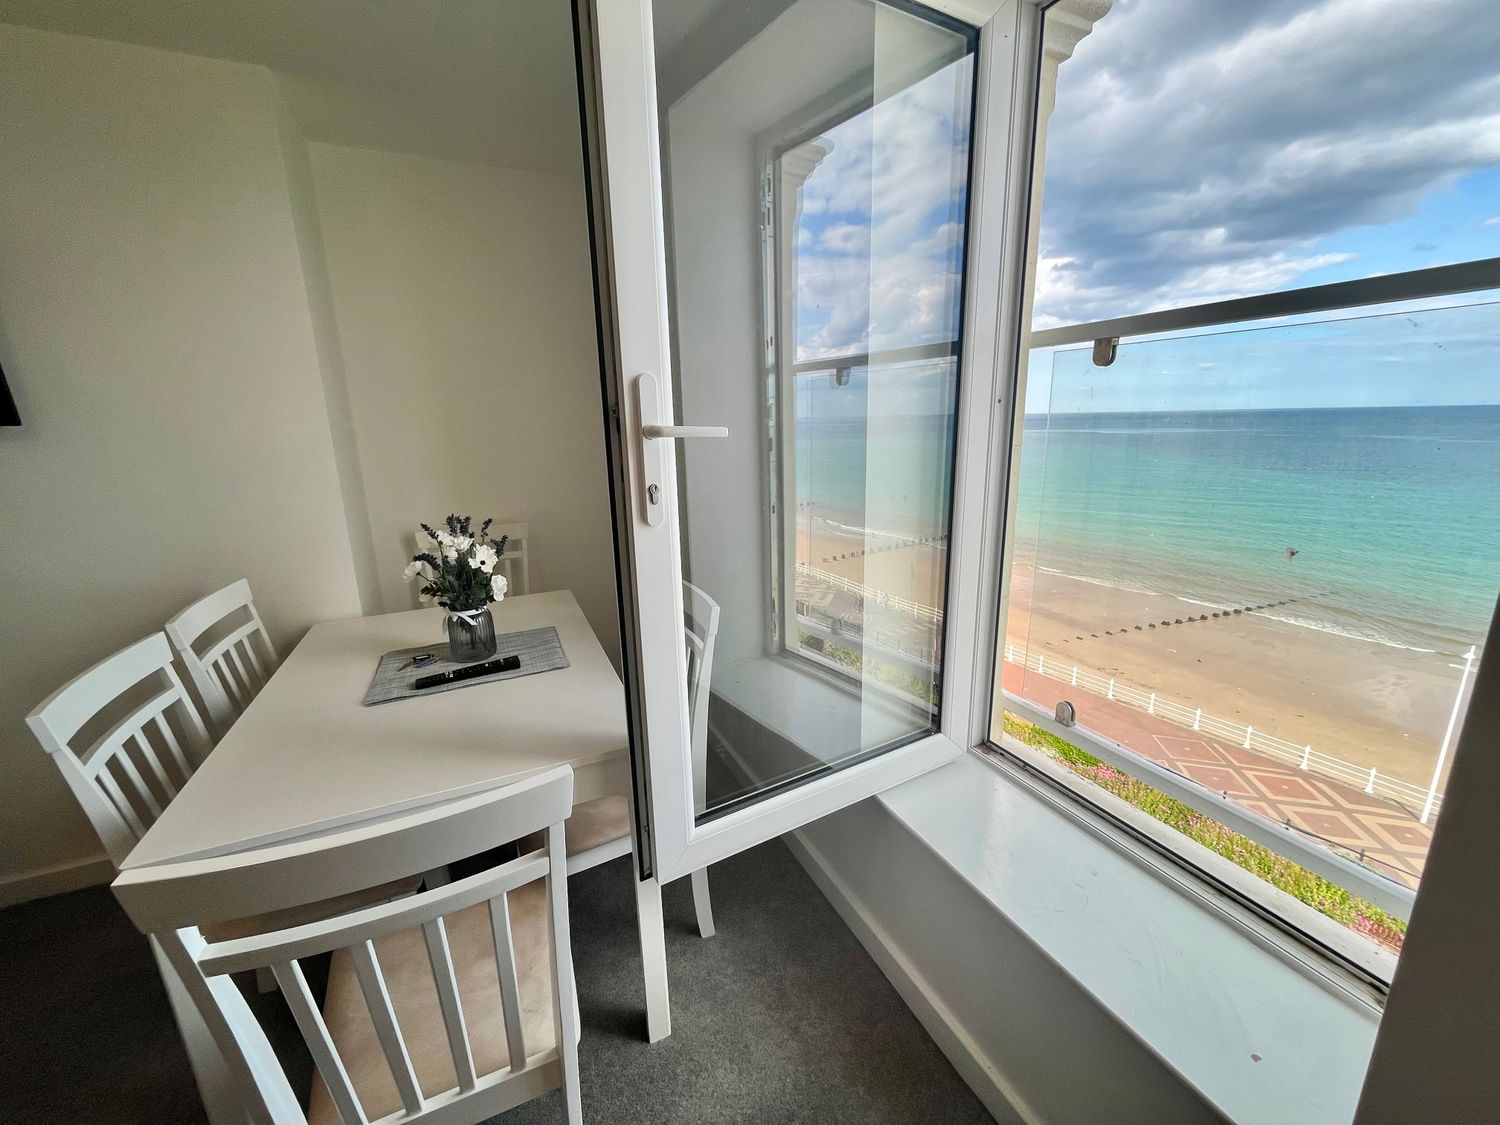 7 Seaview @ Bridlington Bay - North Yorkshire (incl. Whitby) - 1136971 - photo 1